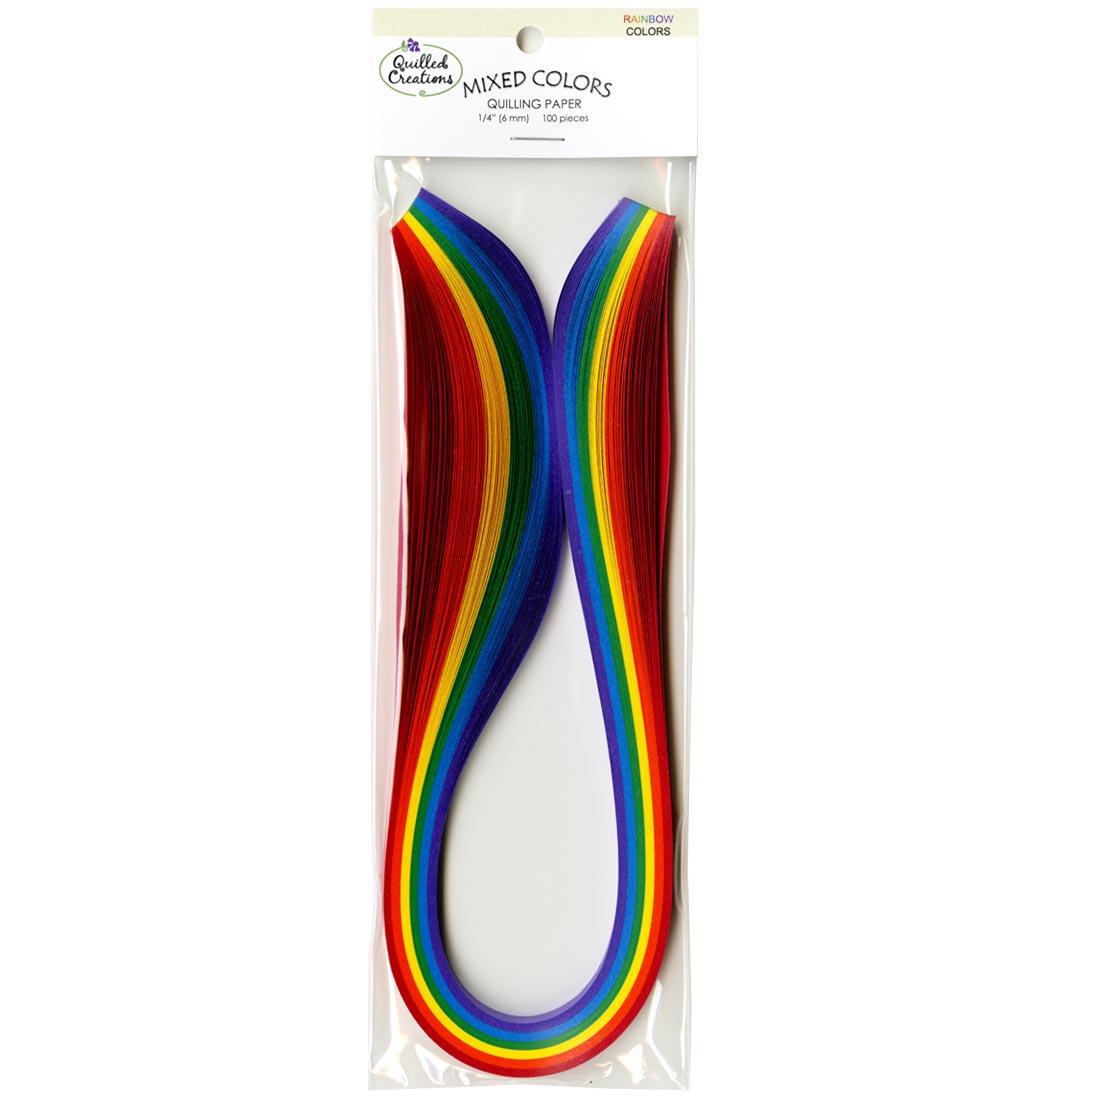 Rainbow Colors Quilling Paper by Quilled Creations